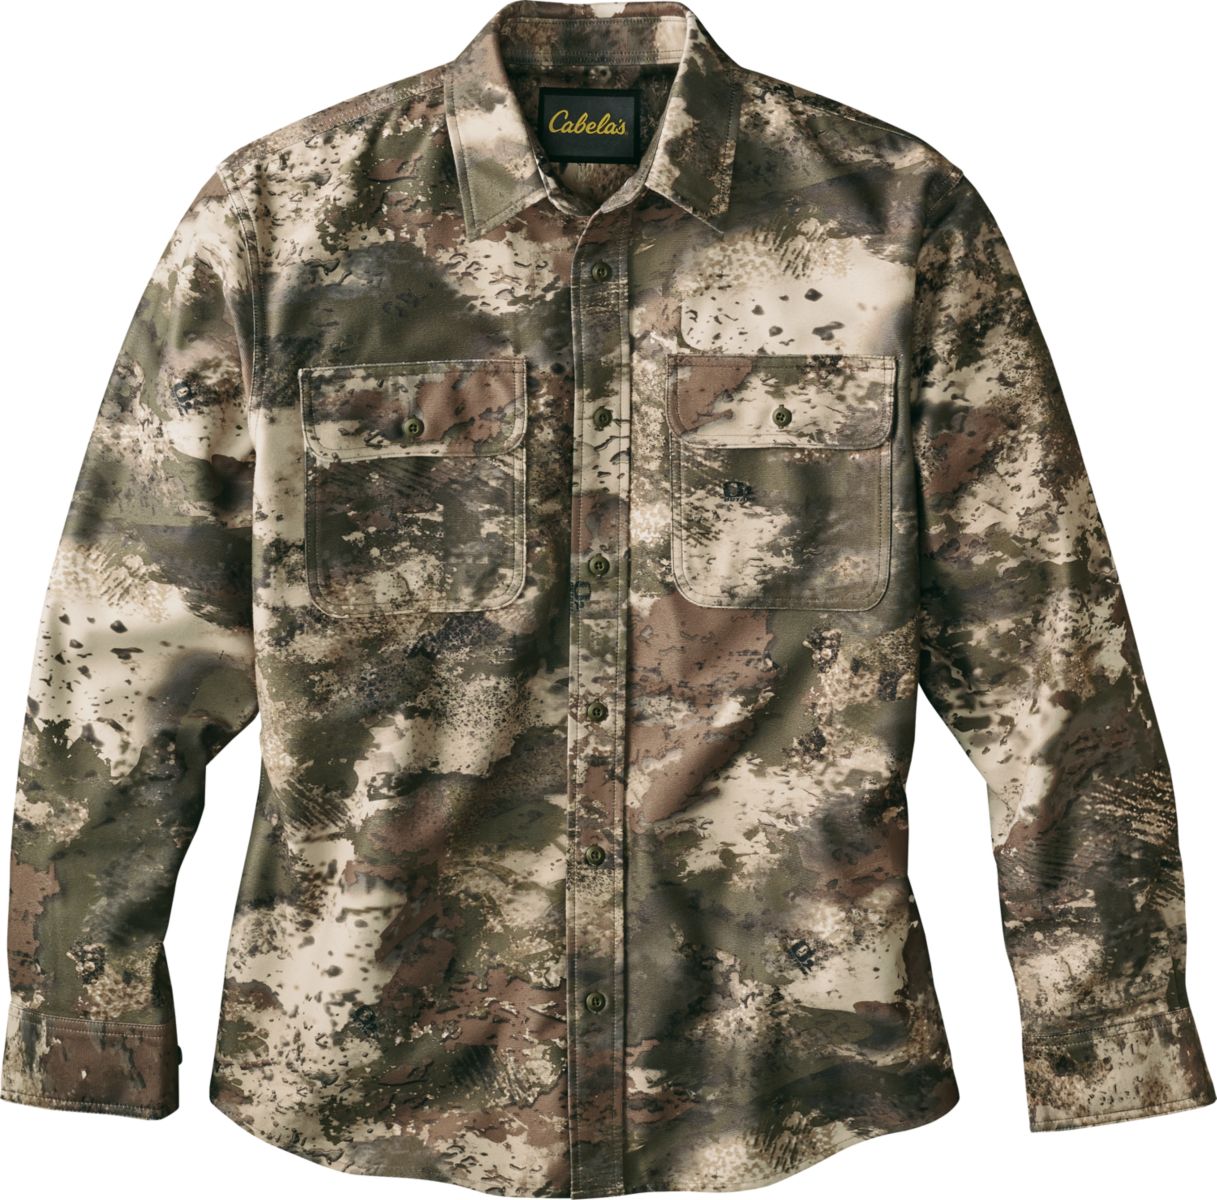 Cabela's Men's Microtex Shirt from $14.88 (Free 2-Day Shipping over $50)